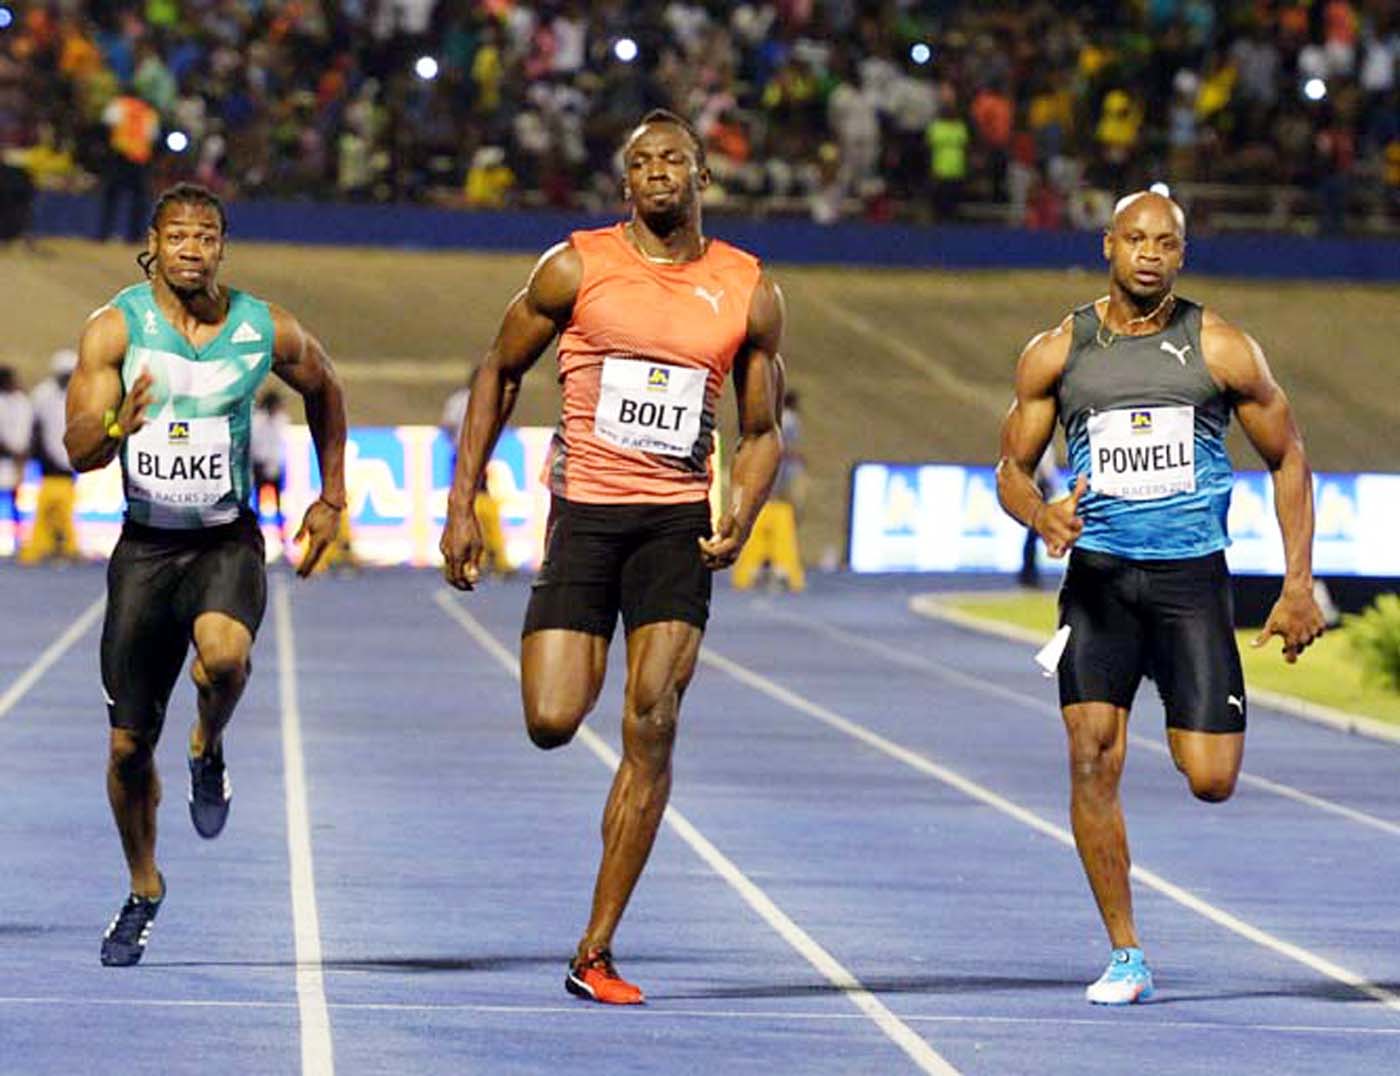 Blake and Powell in loaded men’s 100m semi-finals